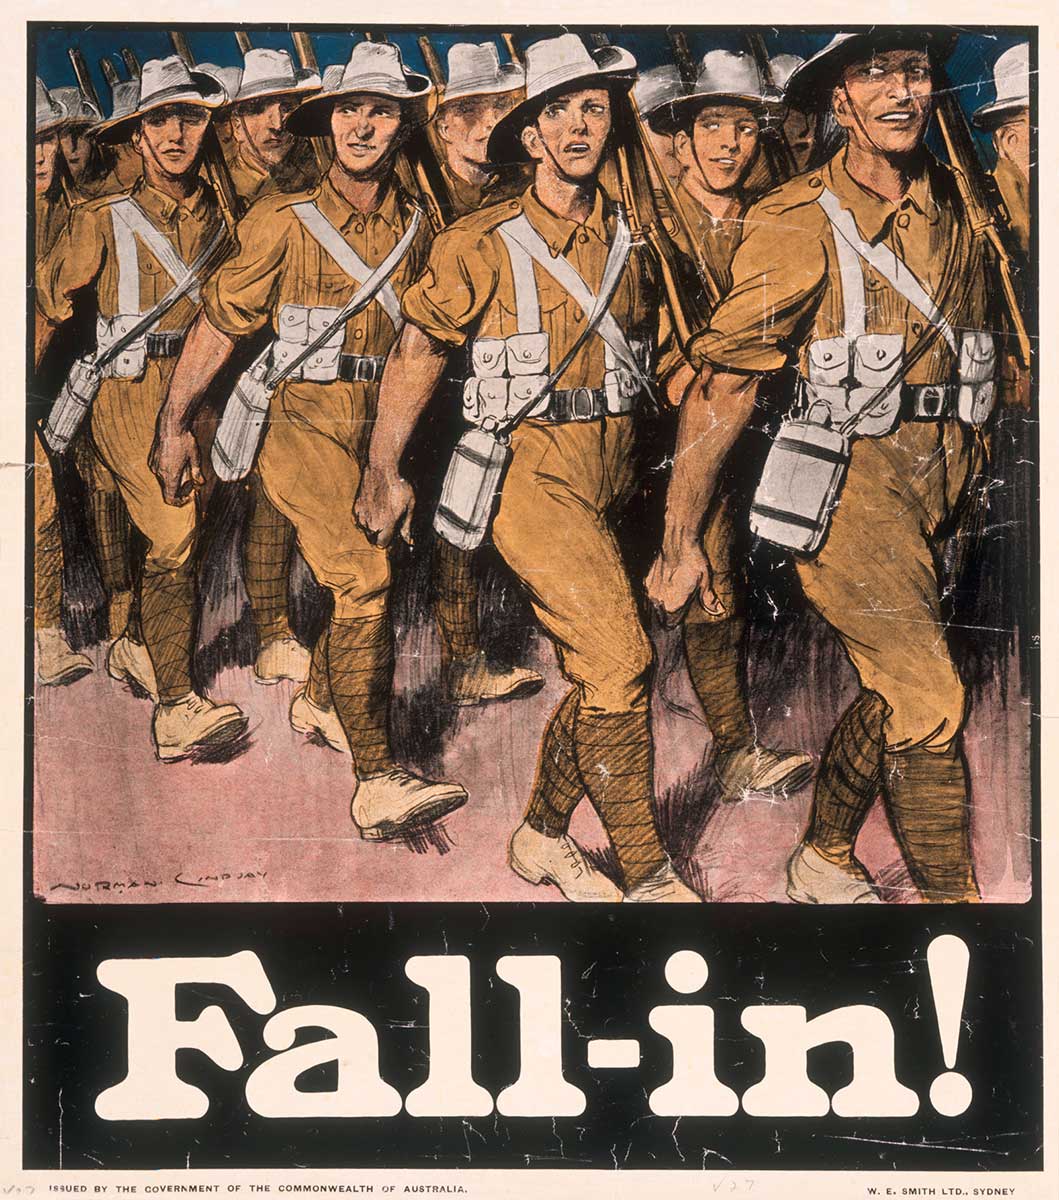 Illustration of an army of soldiers marching in unison. Printed in large text at the bottom is "Fall-in!".